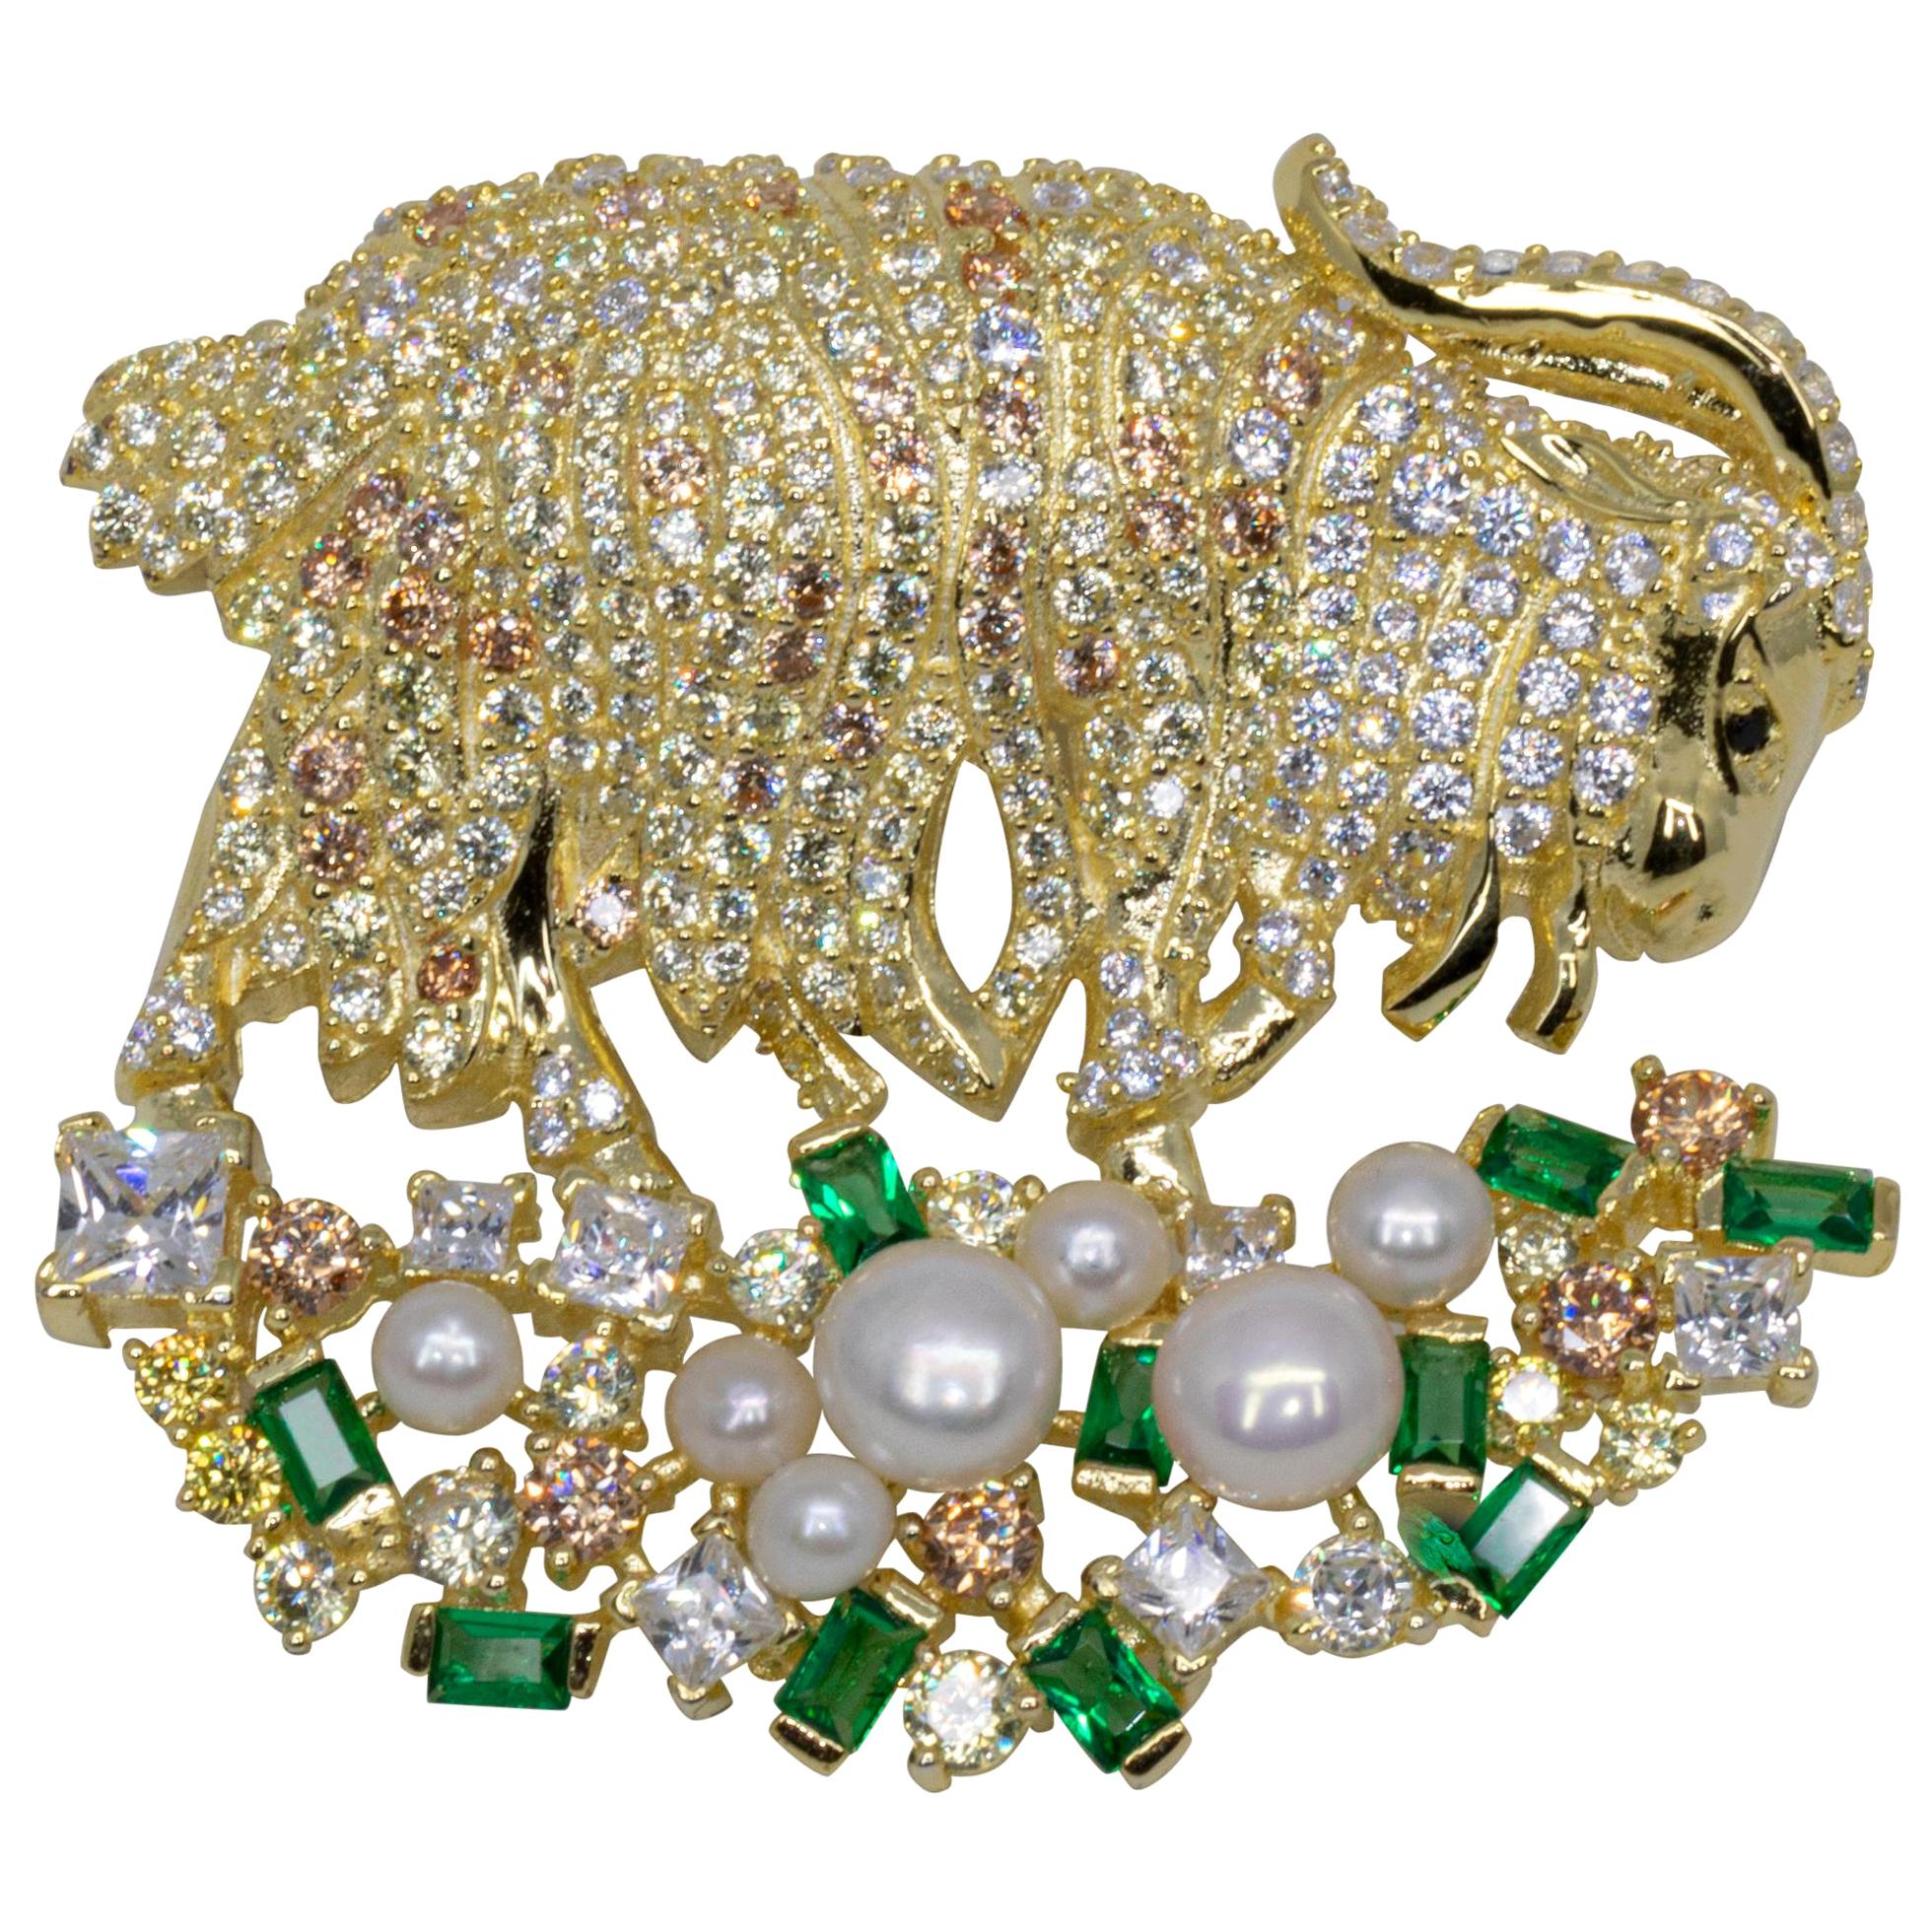 Italian Golden Goat Brooch With Pearls & CZ